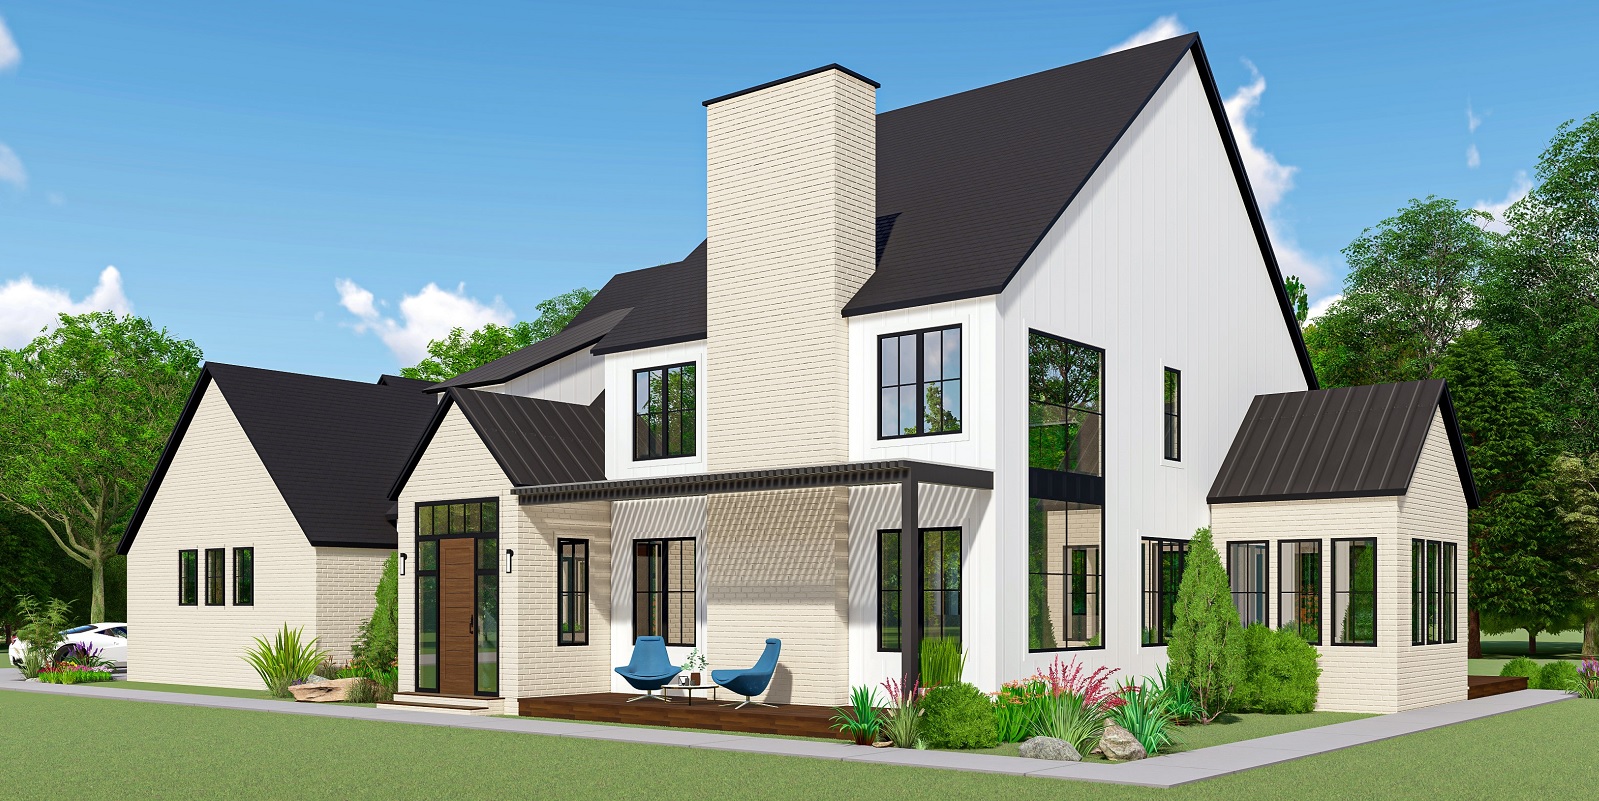 Exterior image of Mikkelson designed and built Magill Custom home.  White exterior with black trim.  